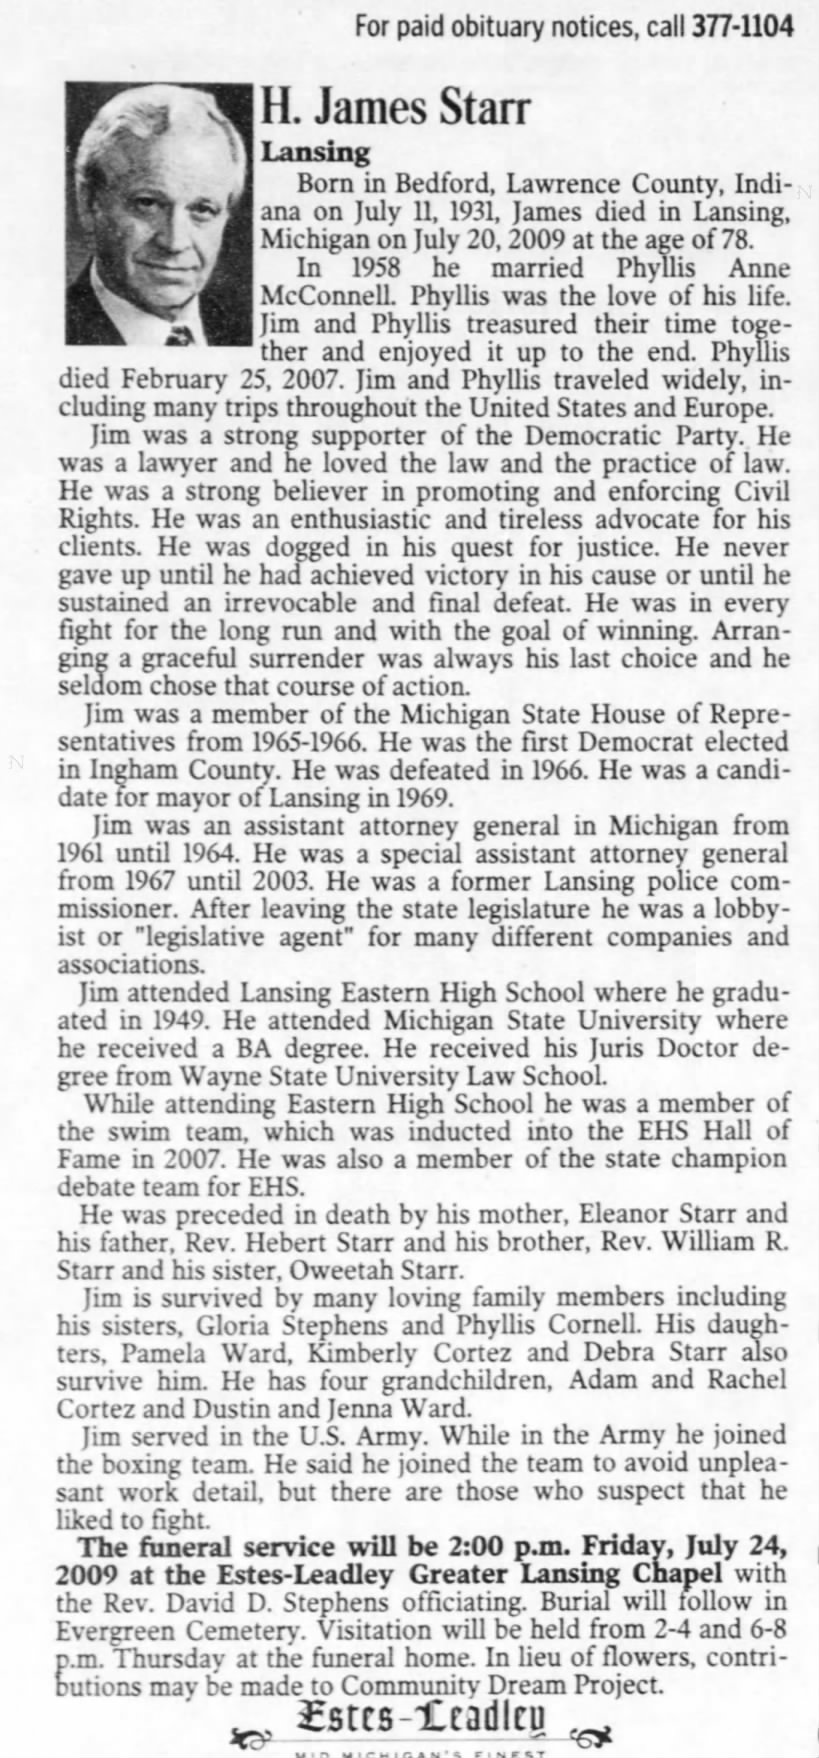 Obituary for H. James Starr, 1931-2009 (Aged 78)